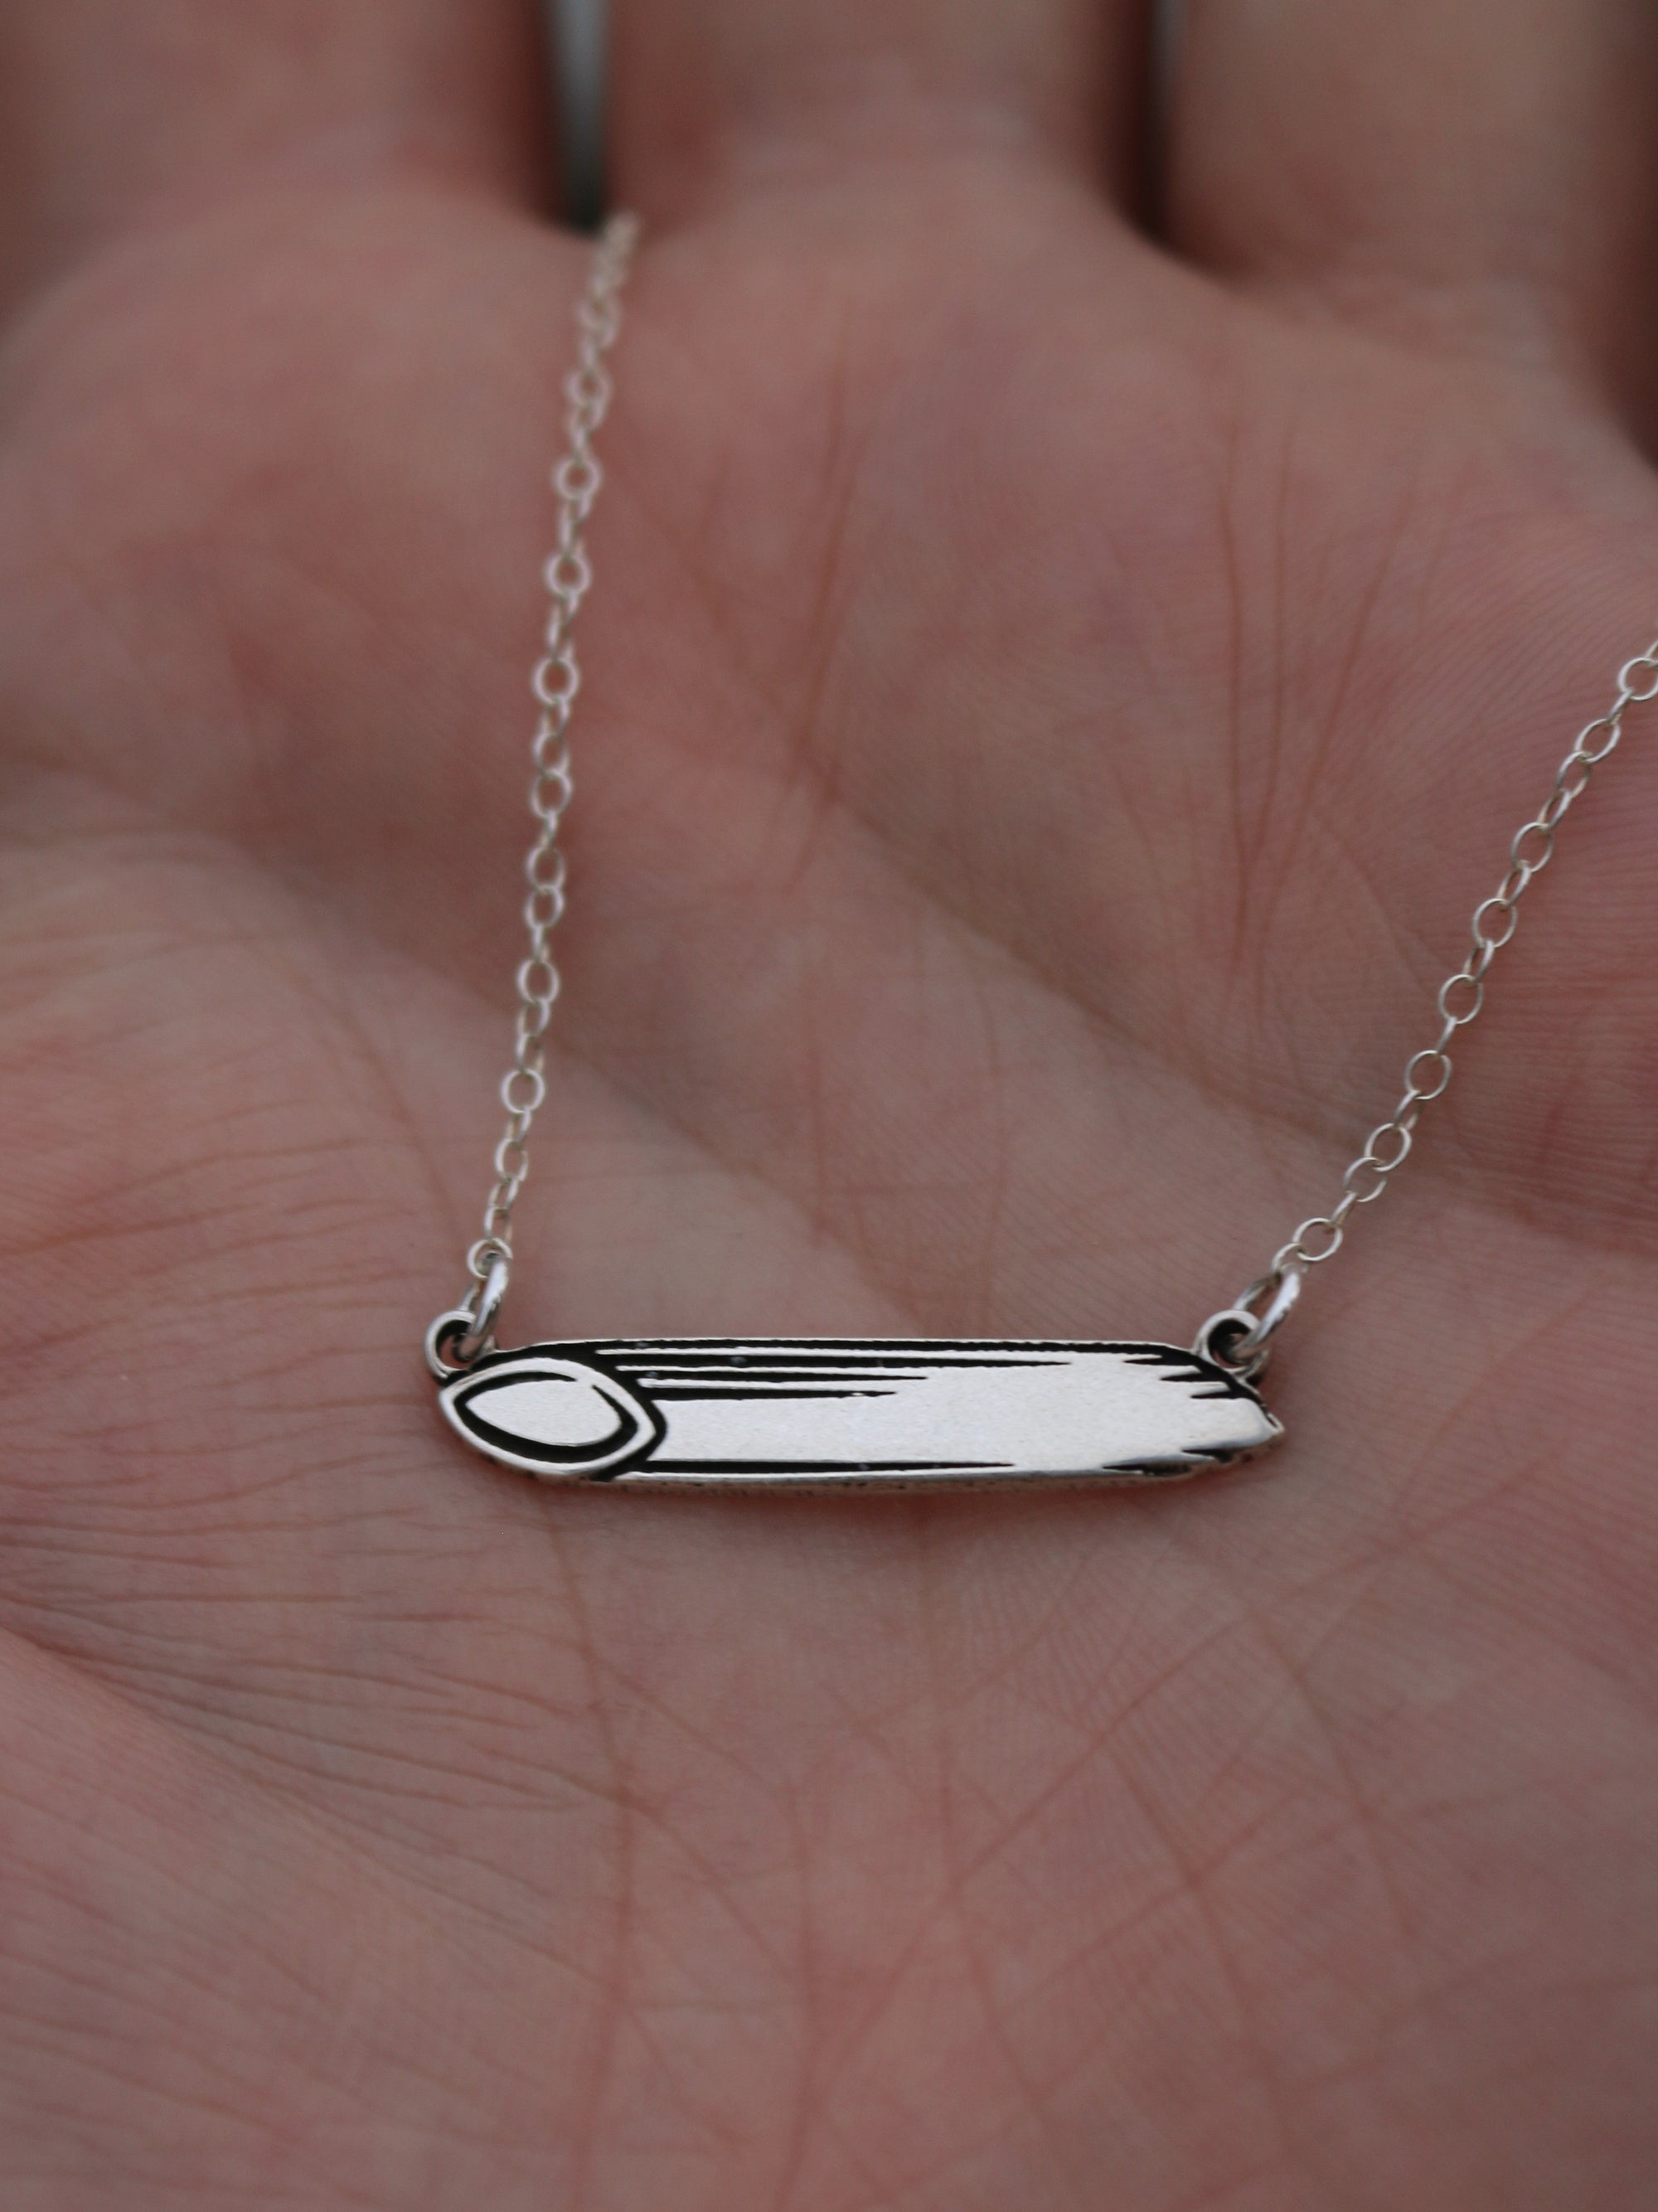 Penne Pasta Necklace - Sterling Silver